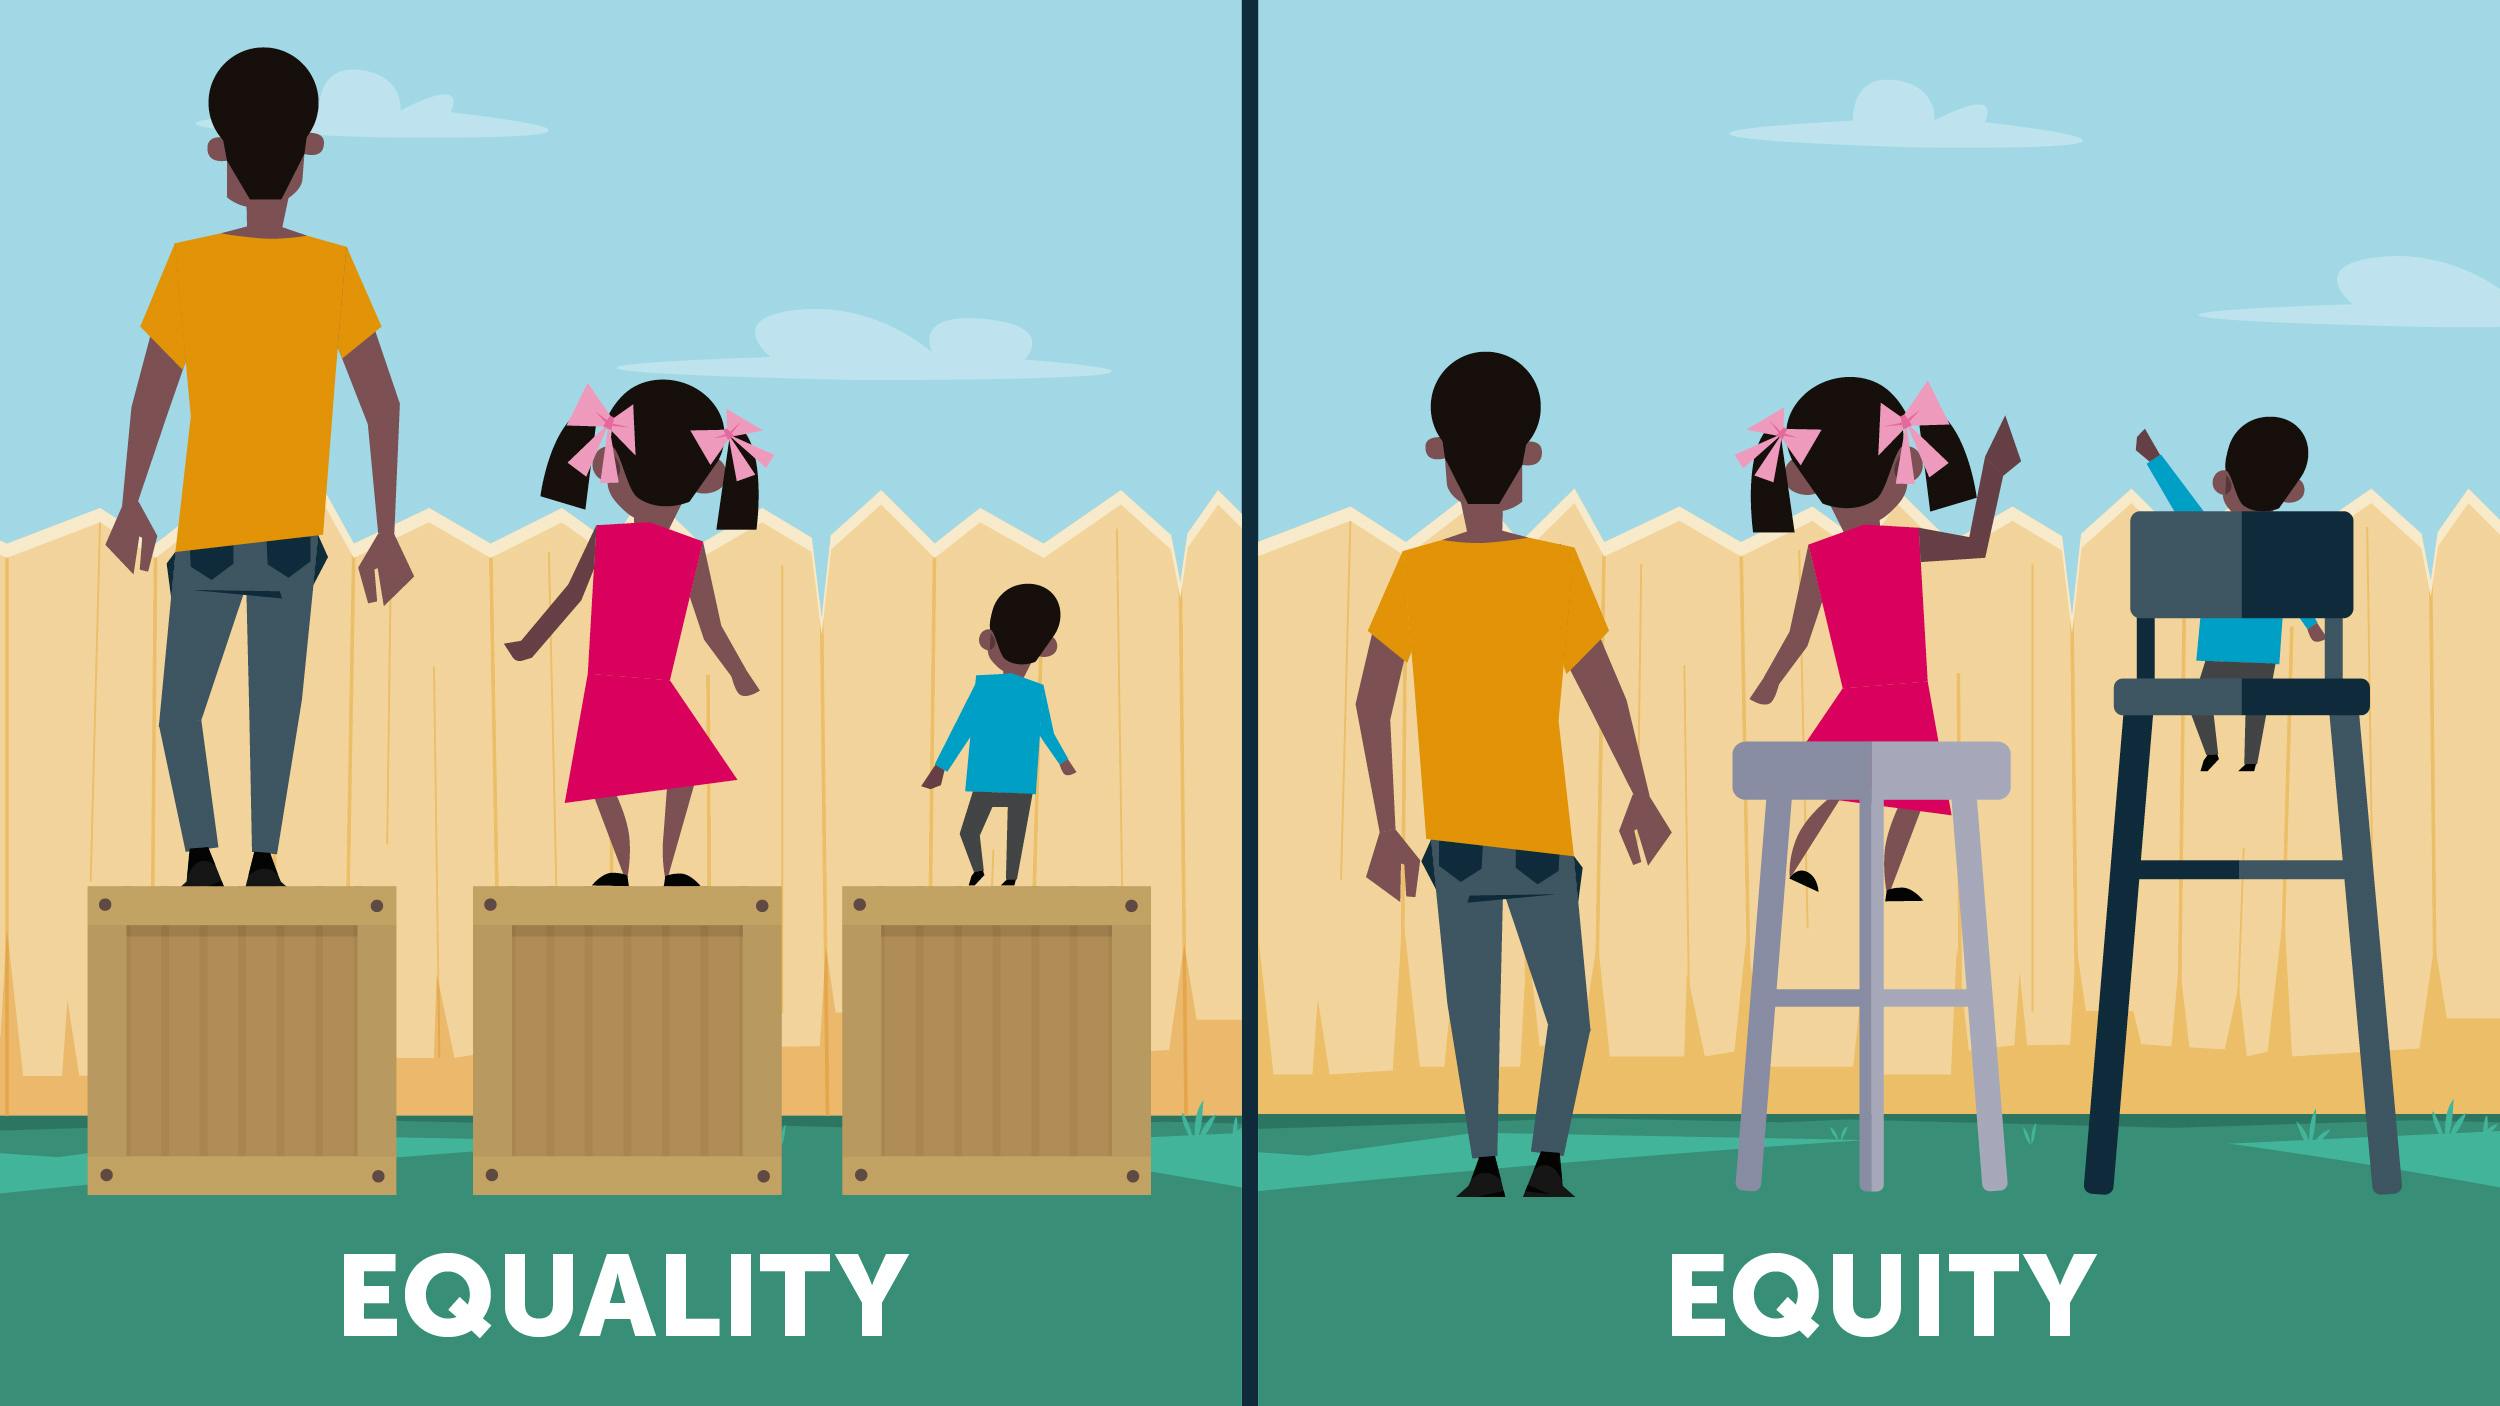 Image showing difference between equality and equity